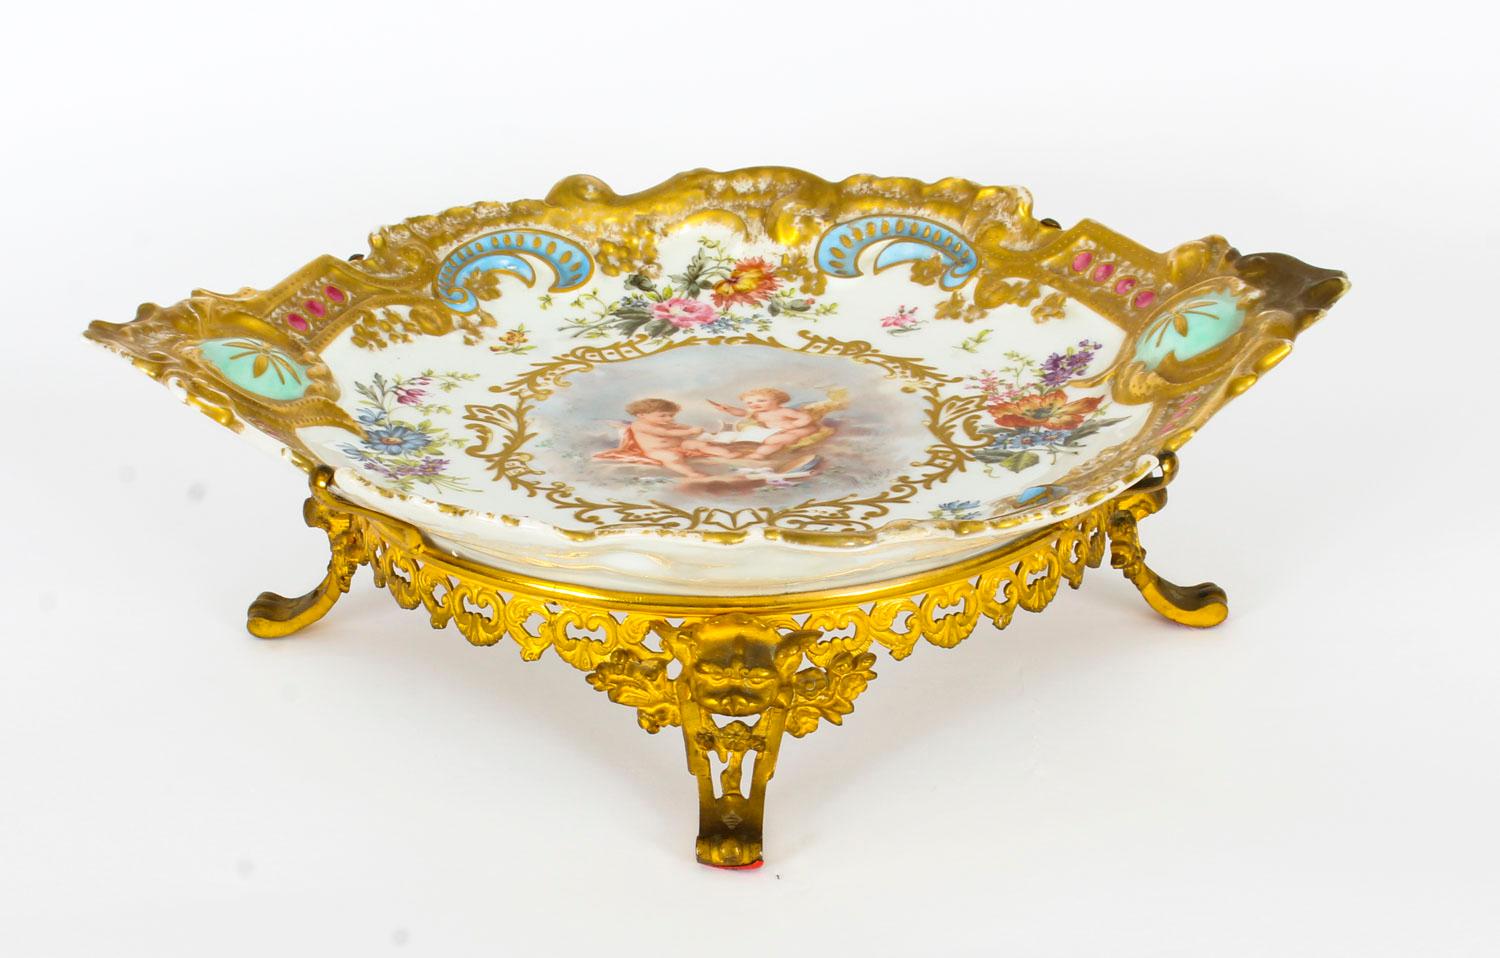 Antique French Porcelain & Ormolu Mounted Centerpiece, Mid-19th Century 16